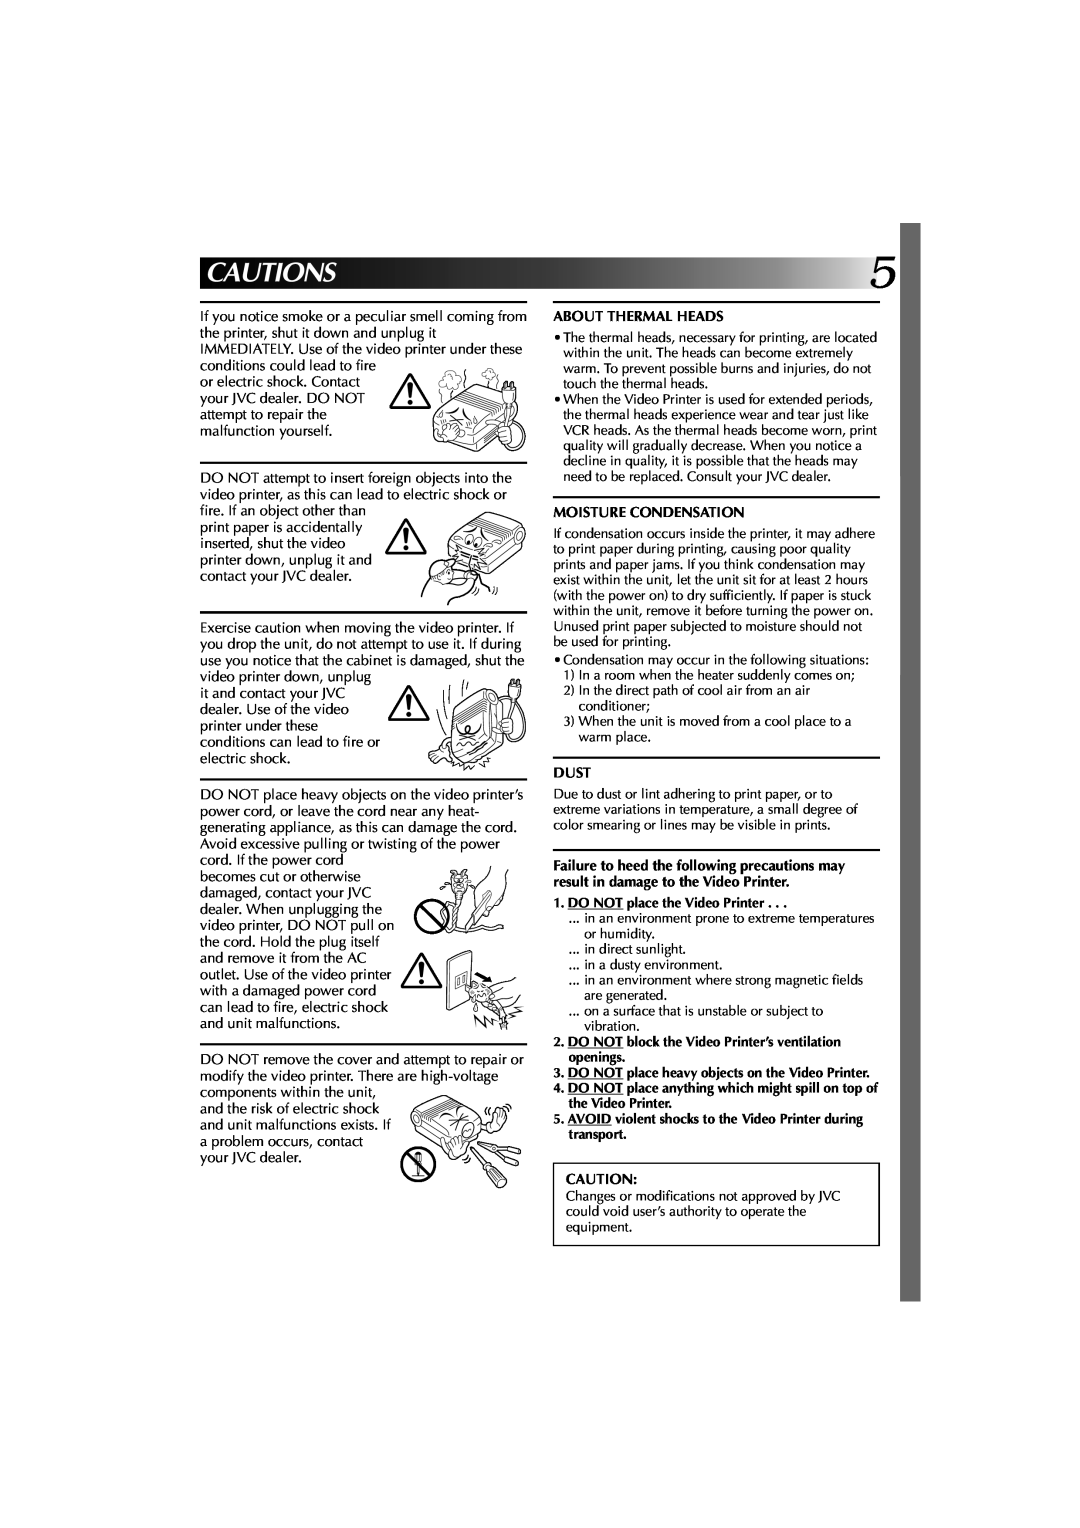 JVC GV-PT1 manual Cautions, About Thermal Heads, Moisture Condensation, Dust 